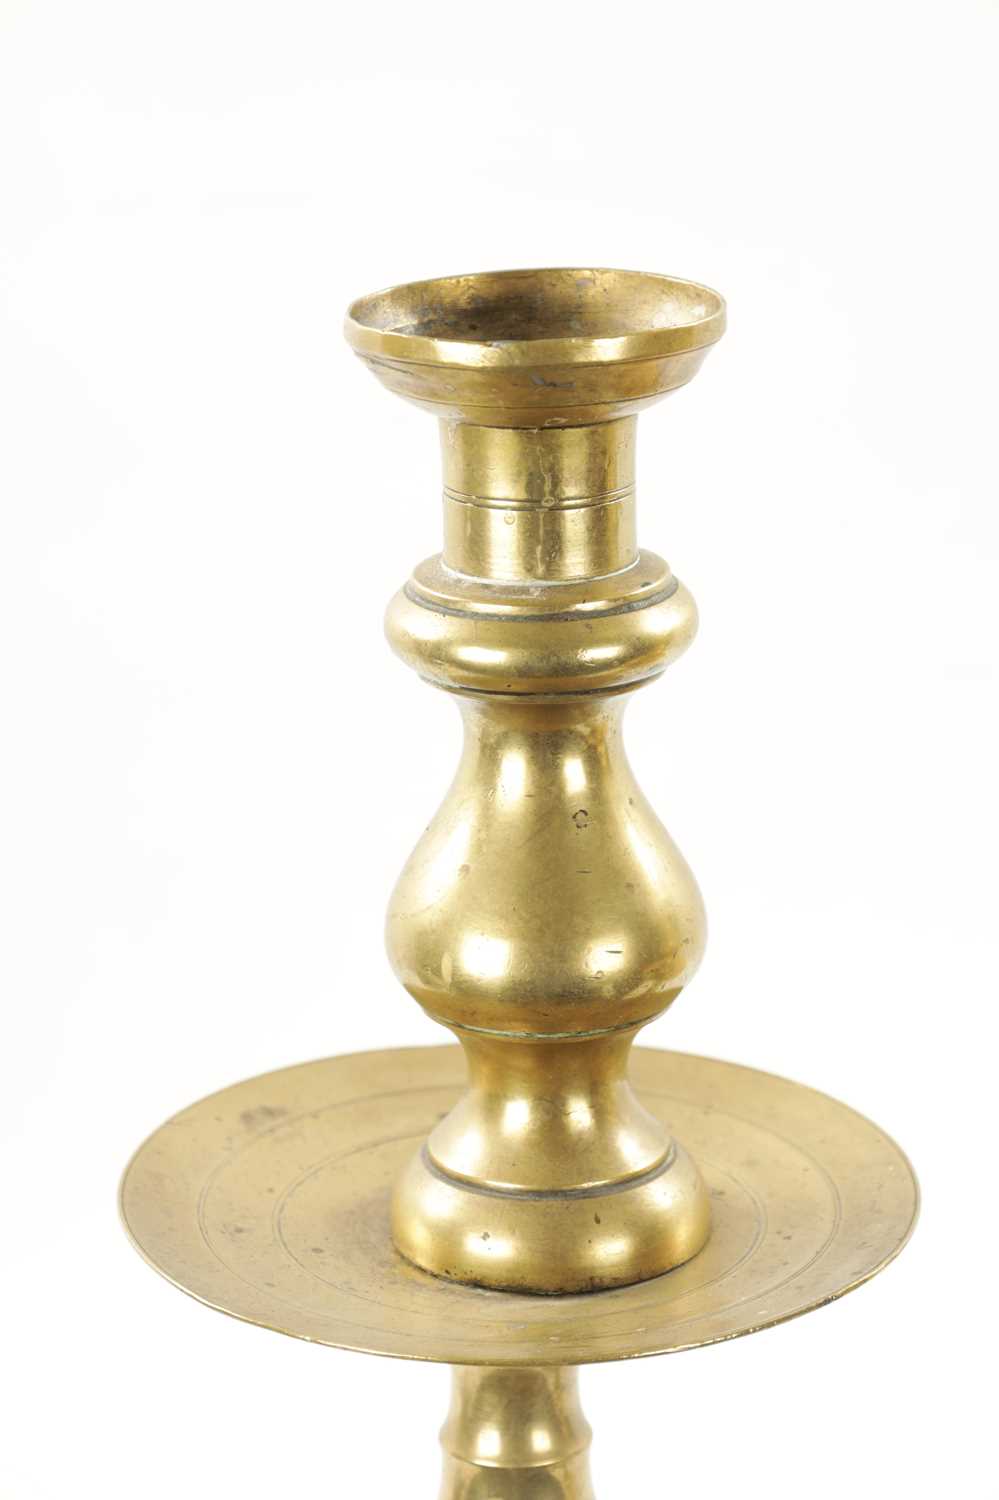 A LARGE PAIR OF 18TH CENTURY BRASS CANDLESTICKS - Image 4 of 9